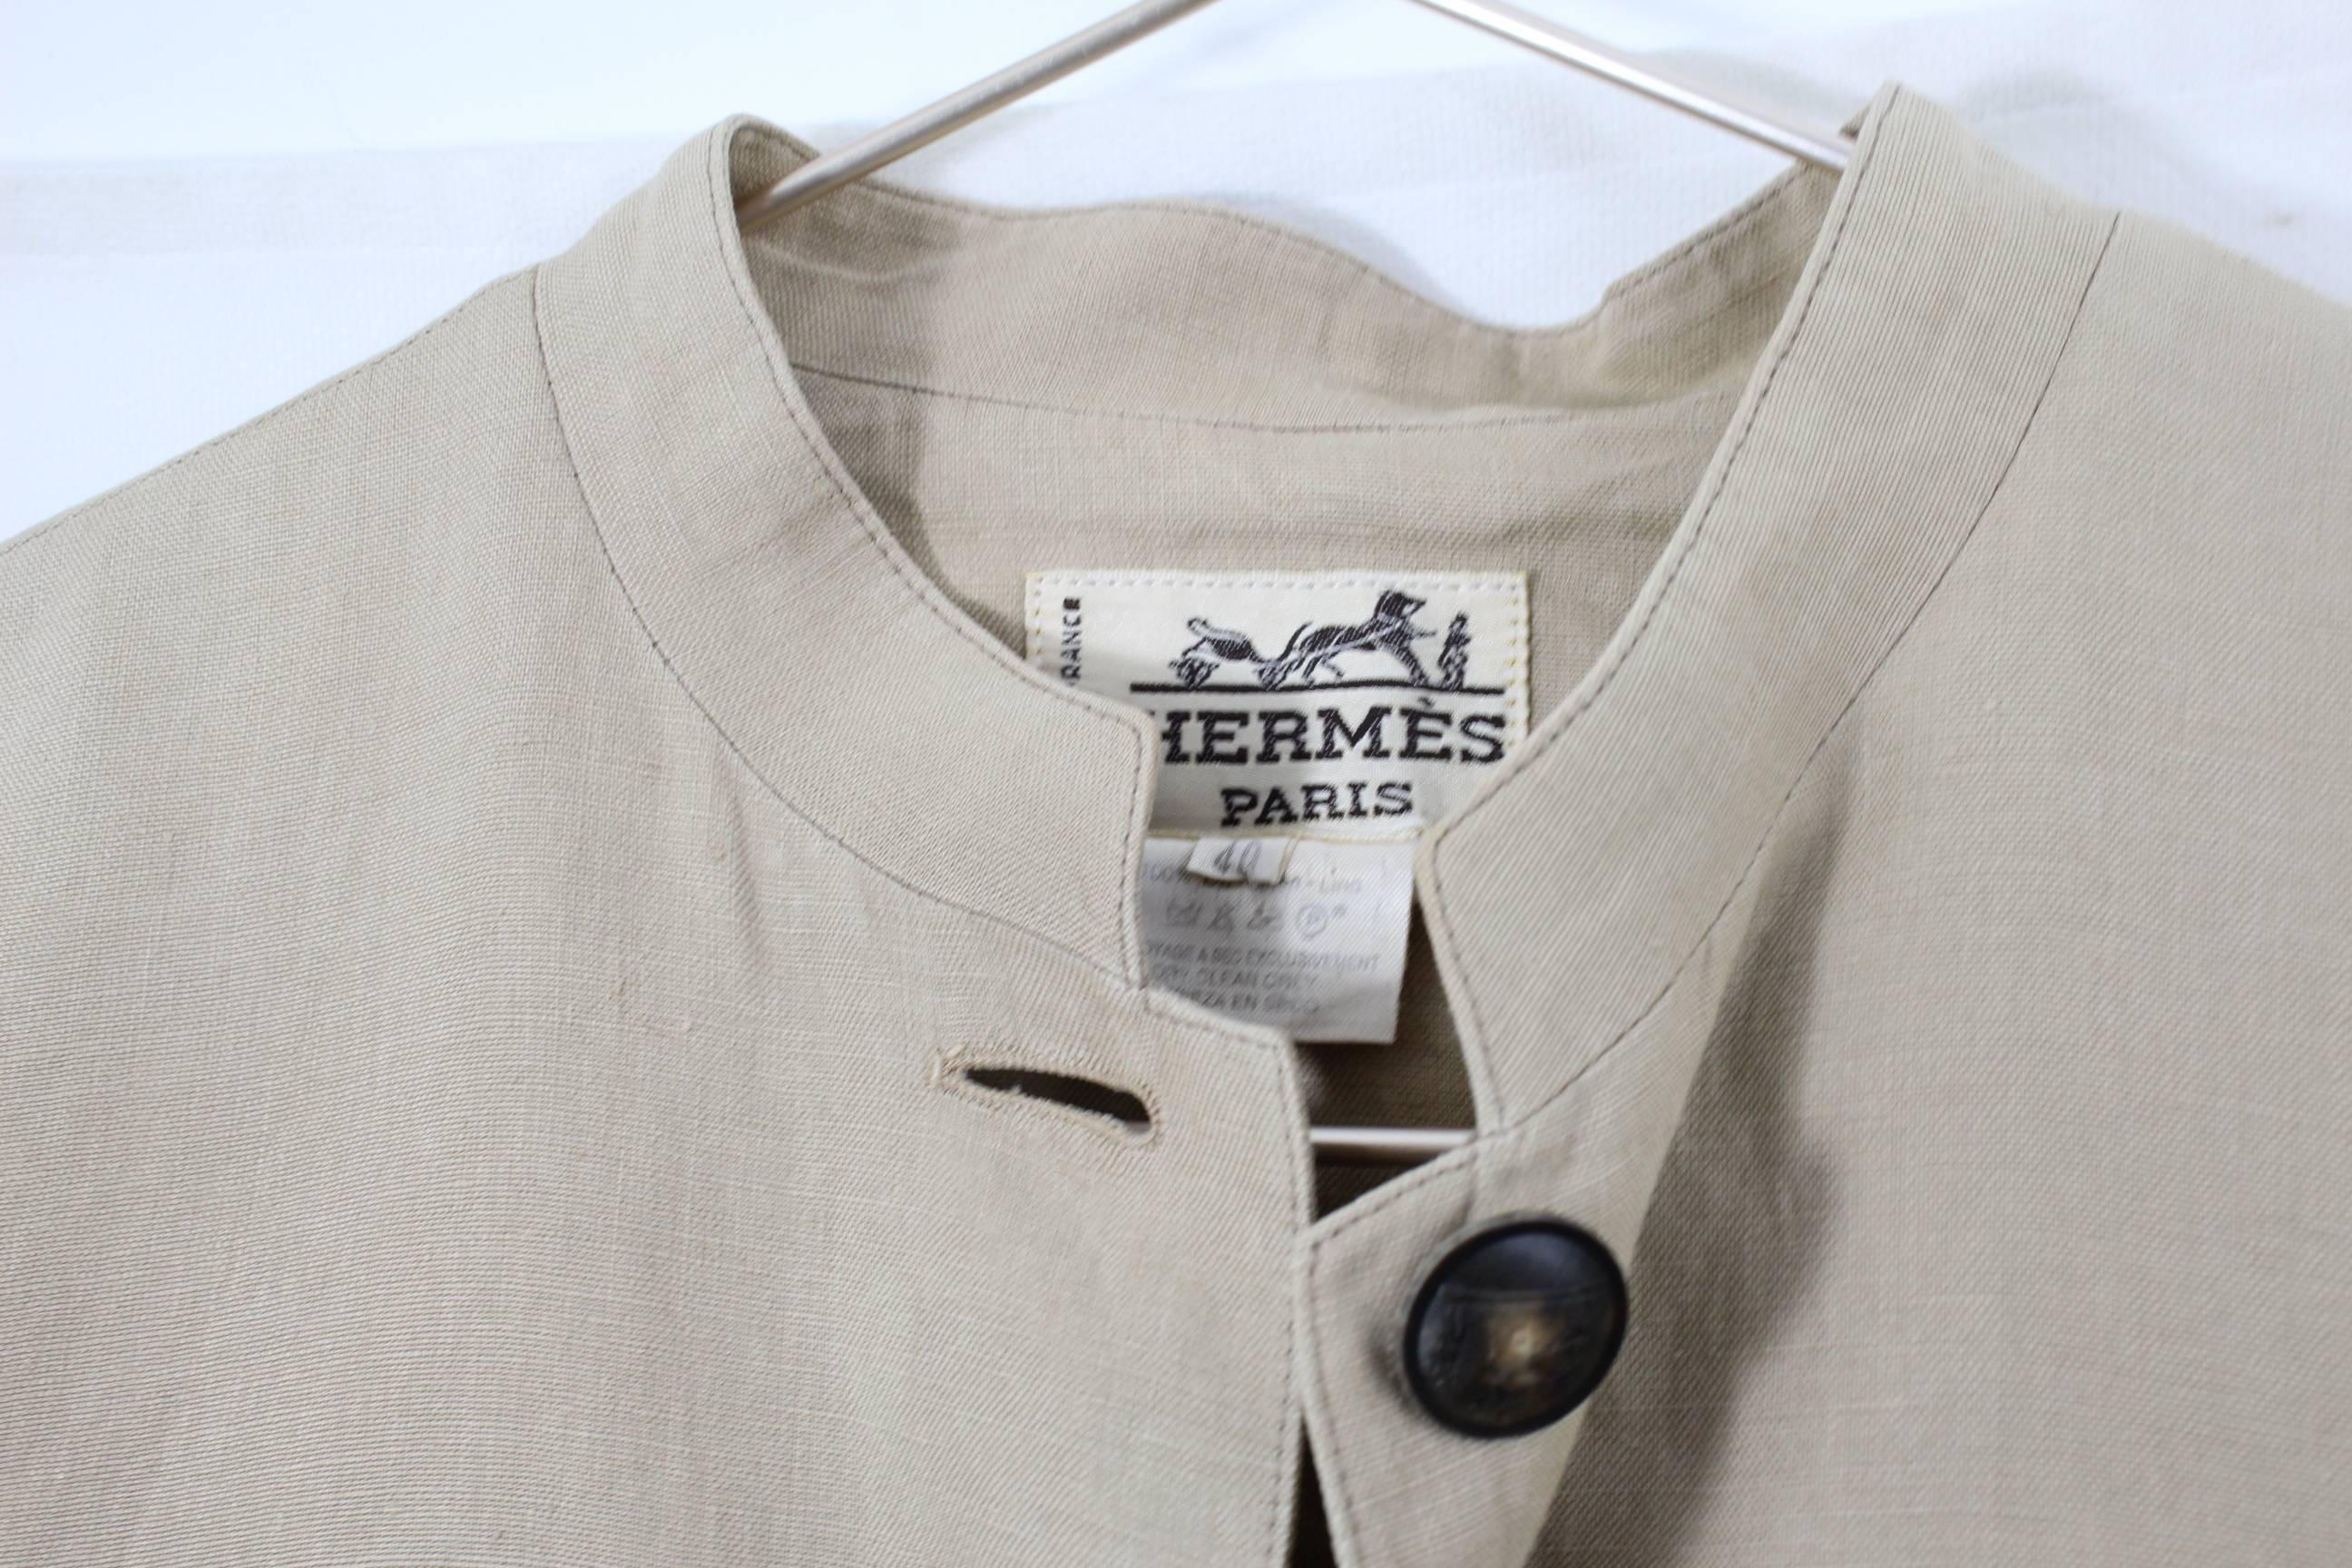 Nice Vintage Hermes jacket in Brown lin.n

Size 40

Really good condtion for a vintage piece.